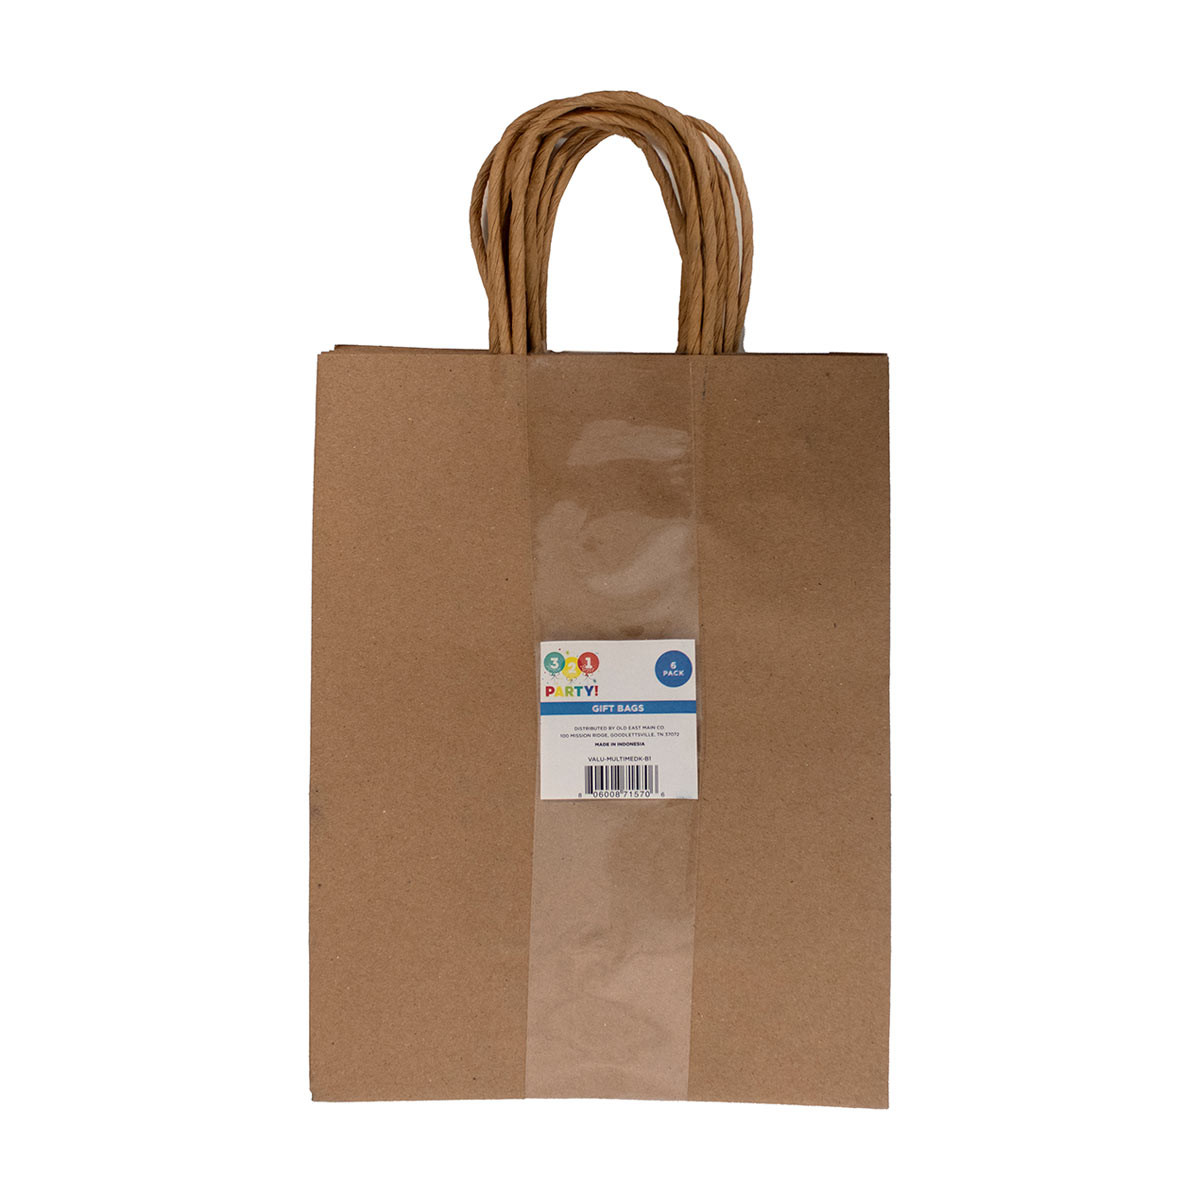 321 Party! Value Size Gift Bags - Brown, 6 Count